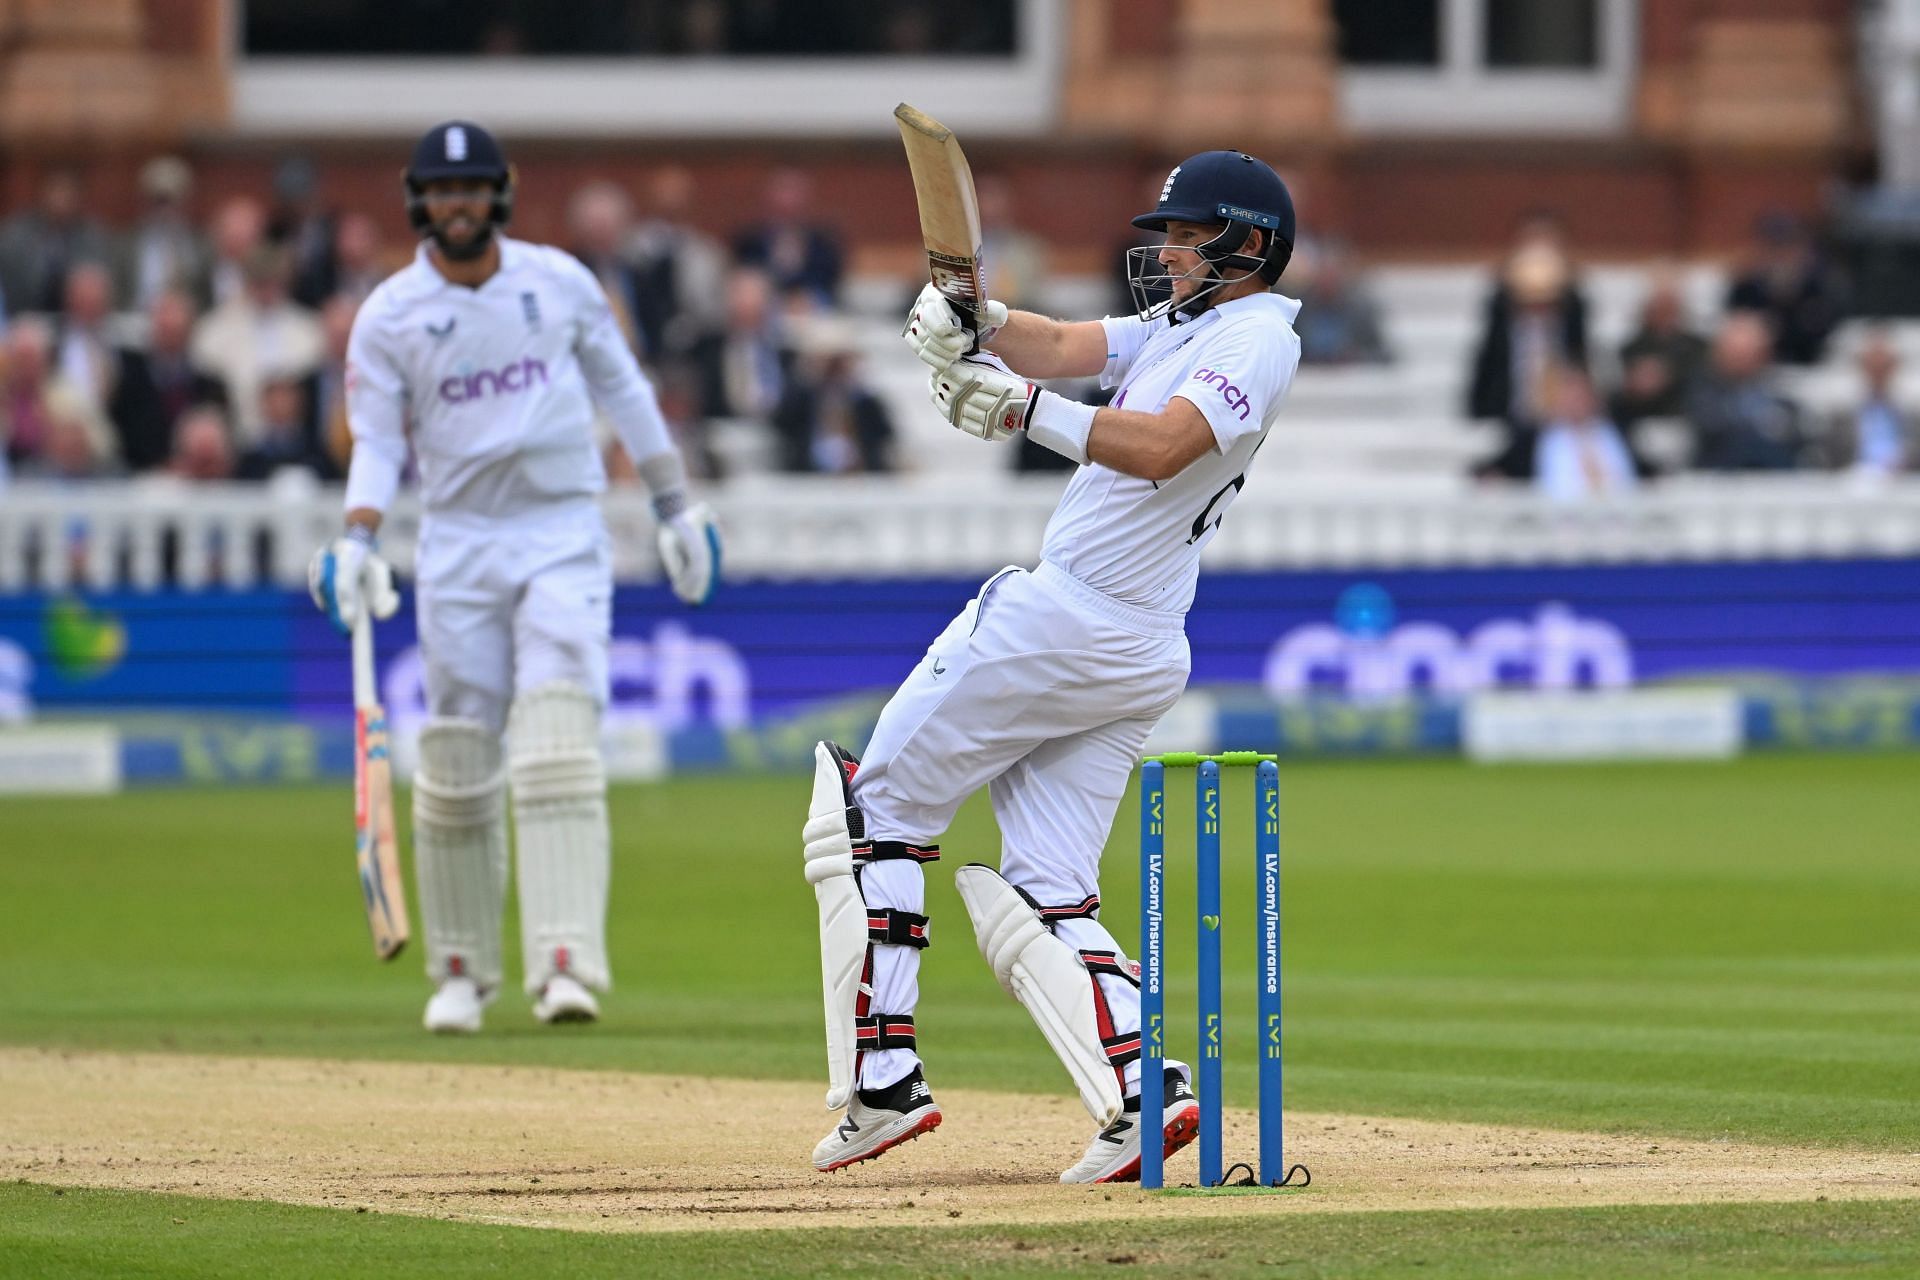 England v New Zealand - First LV= Insurance Test Match: Day Four